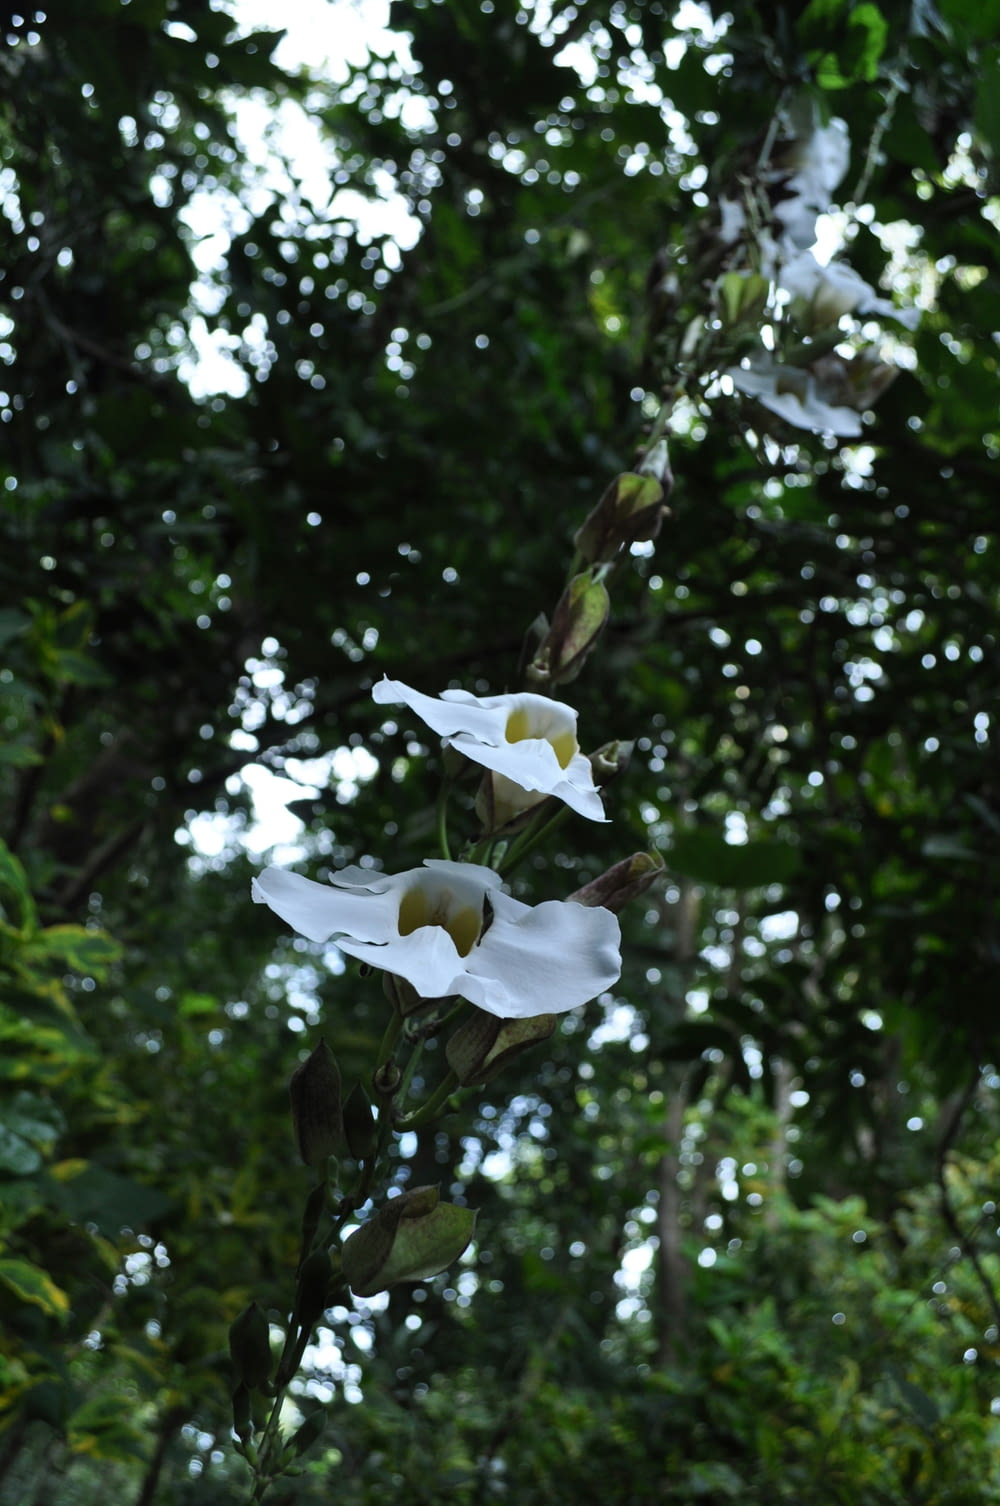 two white flowers with green leaves in the background